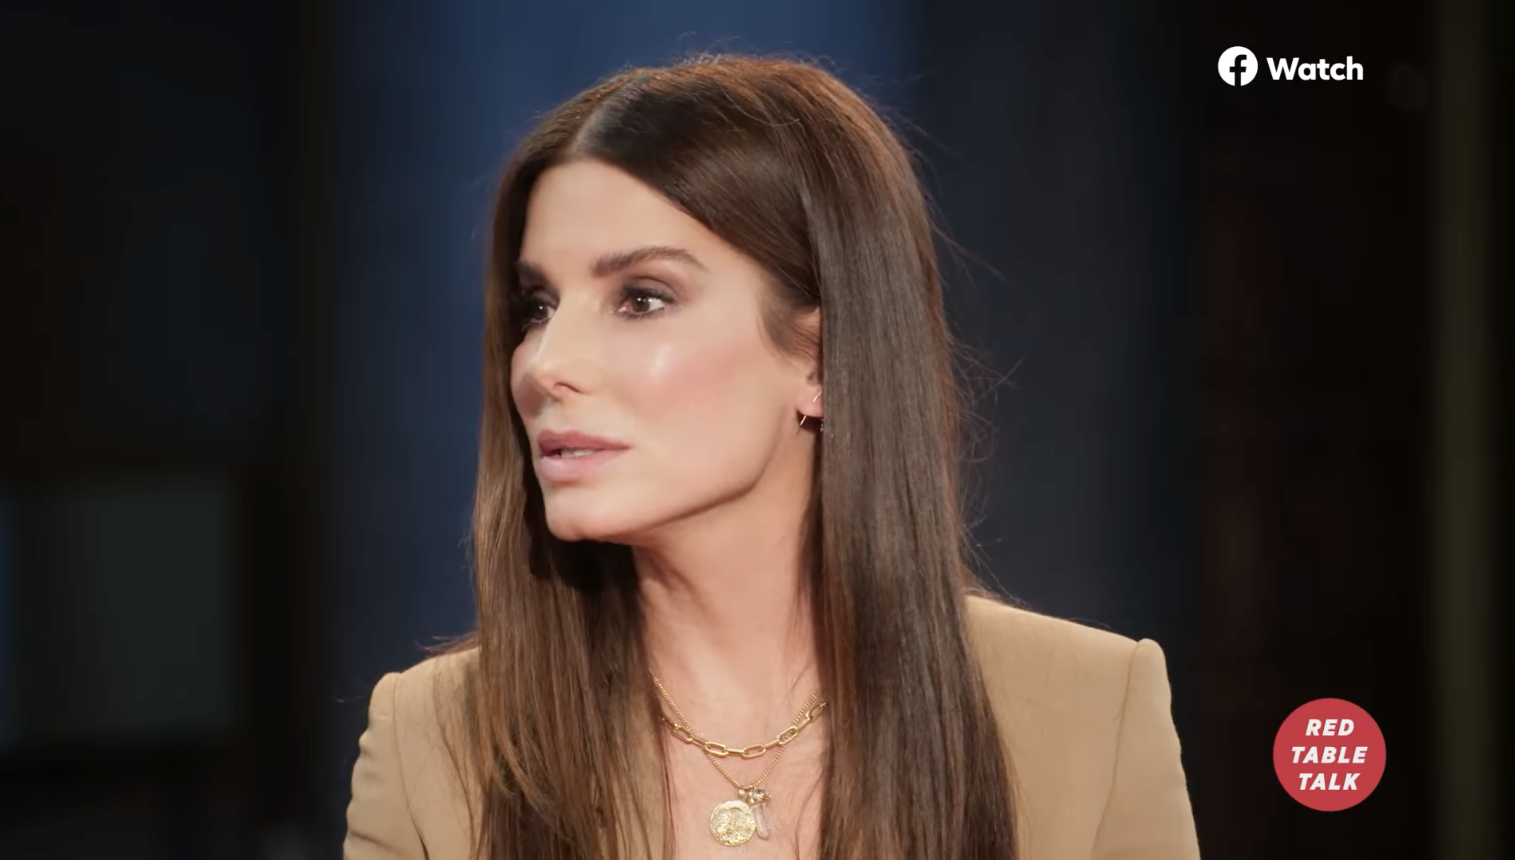 Sandra Bullock Revealed She Sometimes Wishes Her Skin “Matched” Her Adopted  Children's